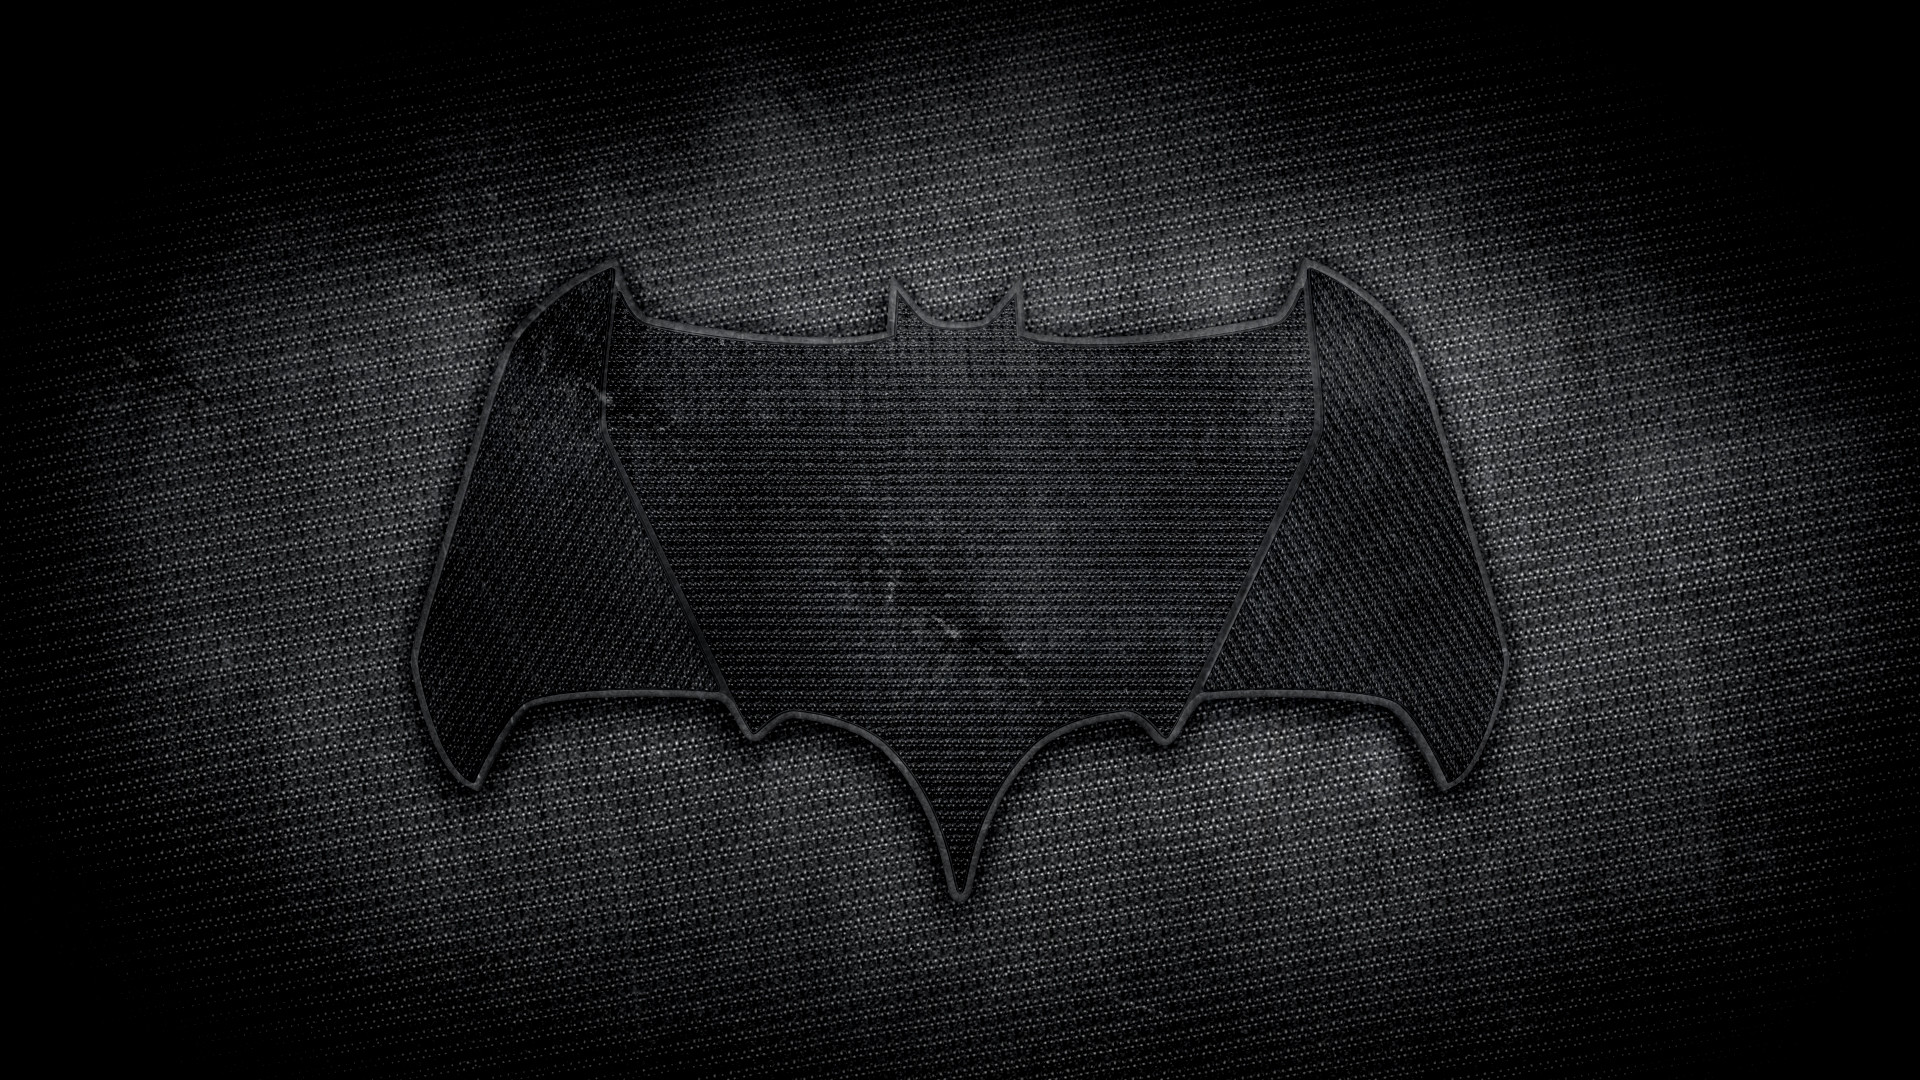 1920x1080 A sketch of what I think the bat symbol will look like based on